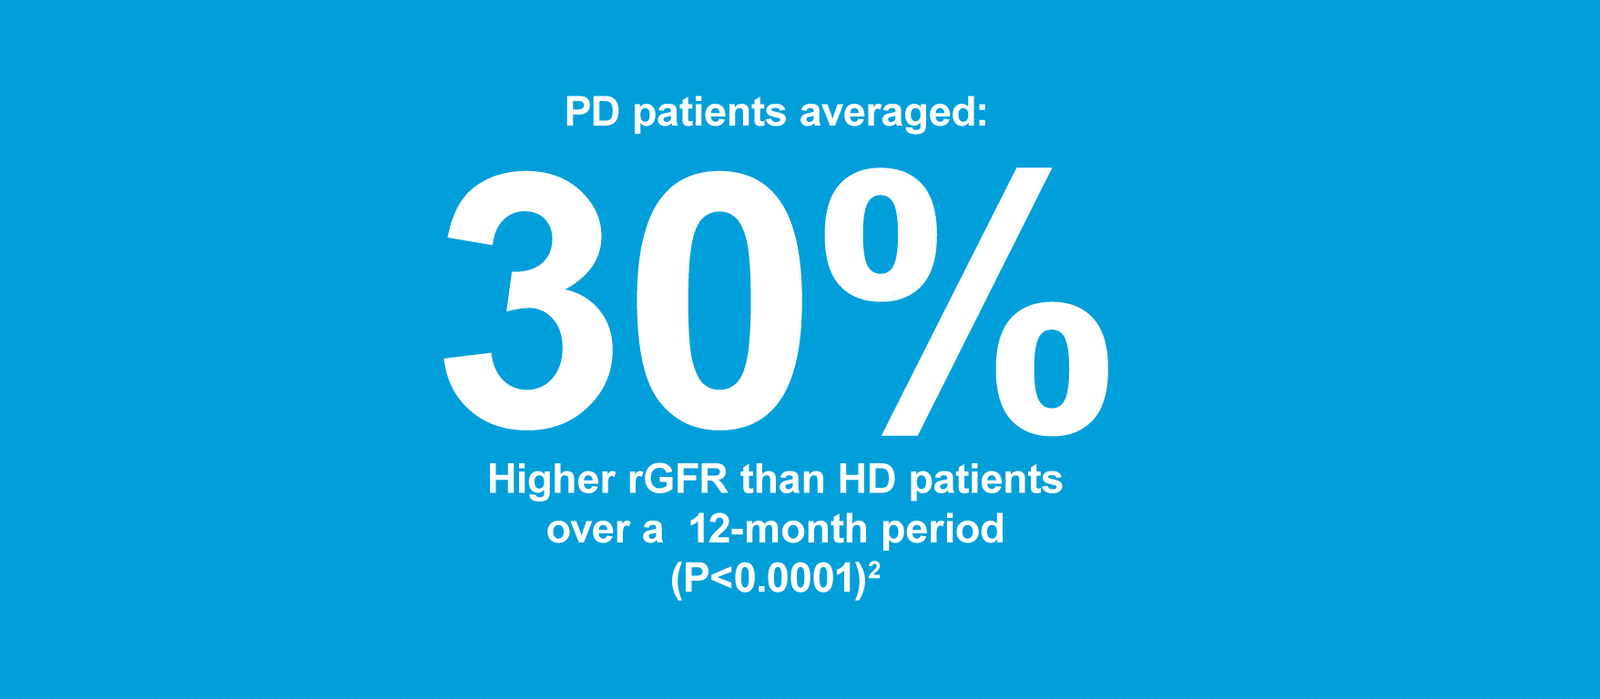 Banner showing 30% higher rGFR result for PD patients over 12 months